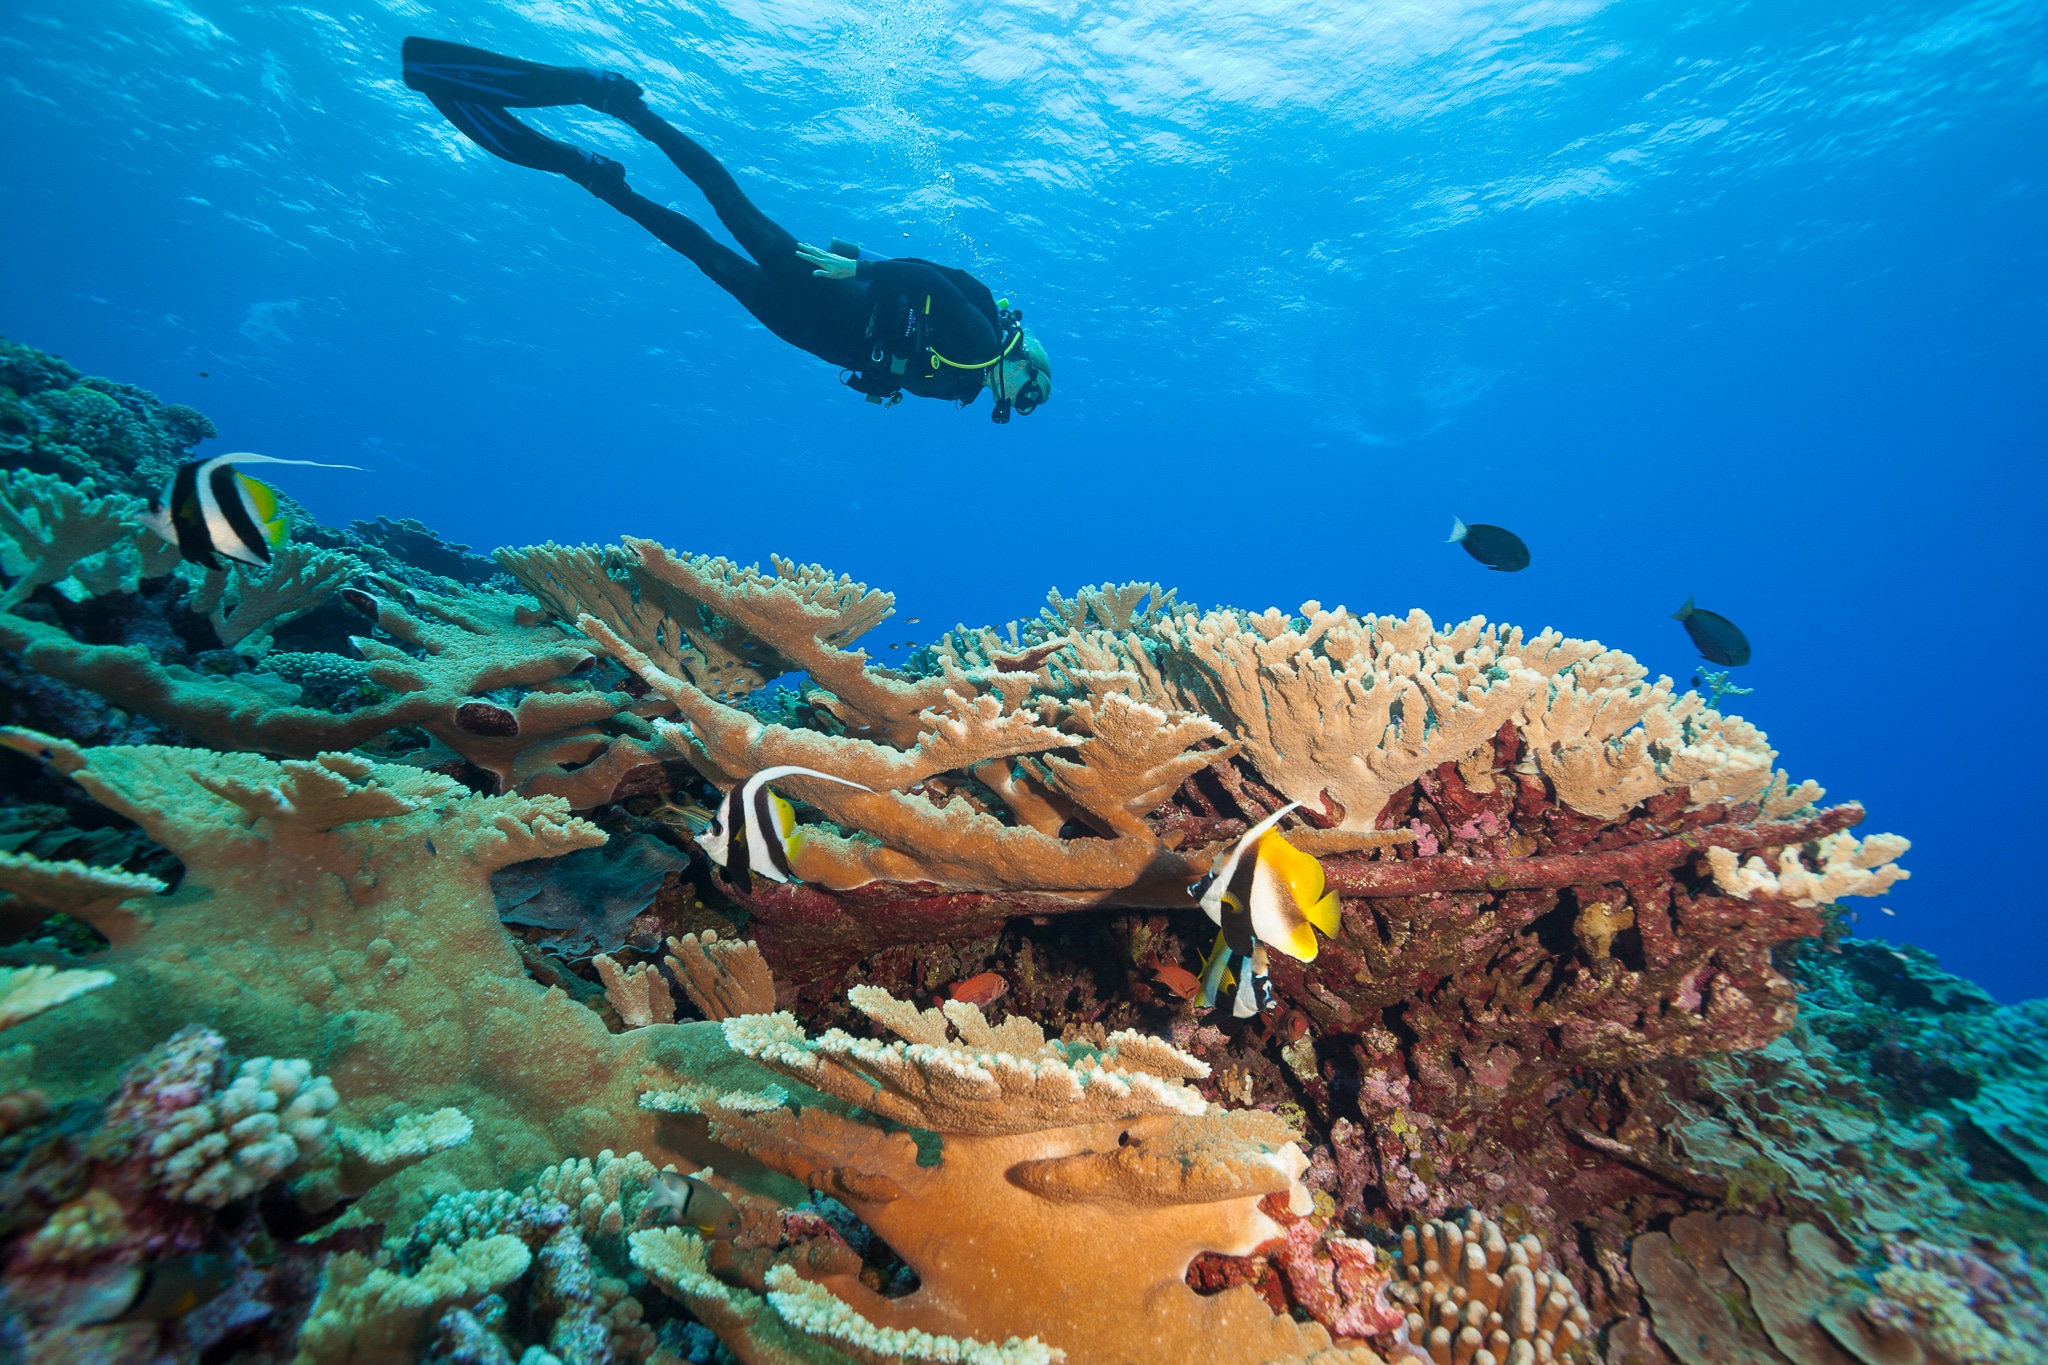 Global Reef Expedition: Research in Pacific & Indian OceansLiving Oceans Foundation